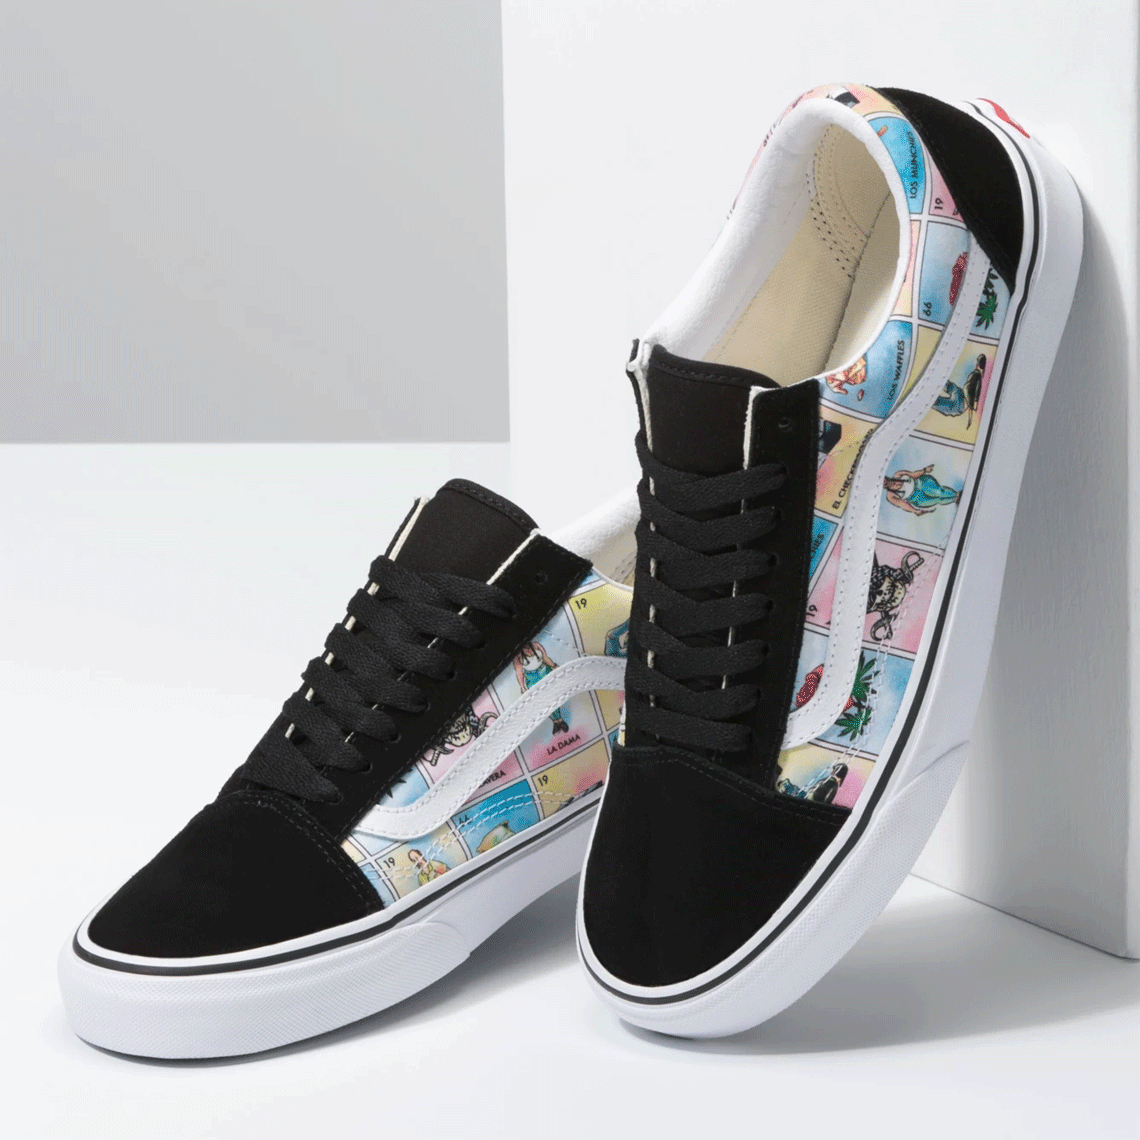 Los vans the simpsons 30th anniversary capsule collection release date Loteria 2